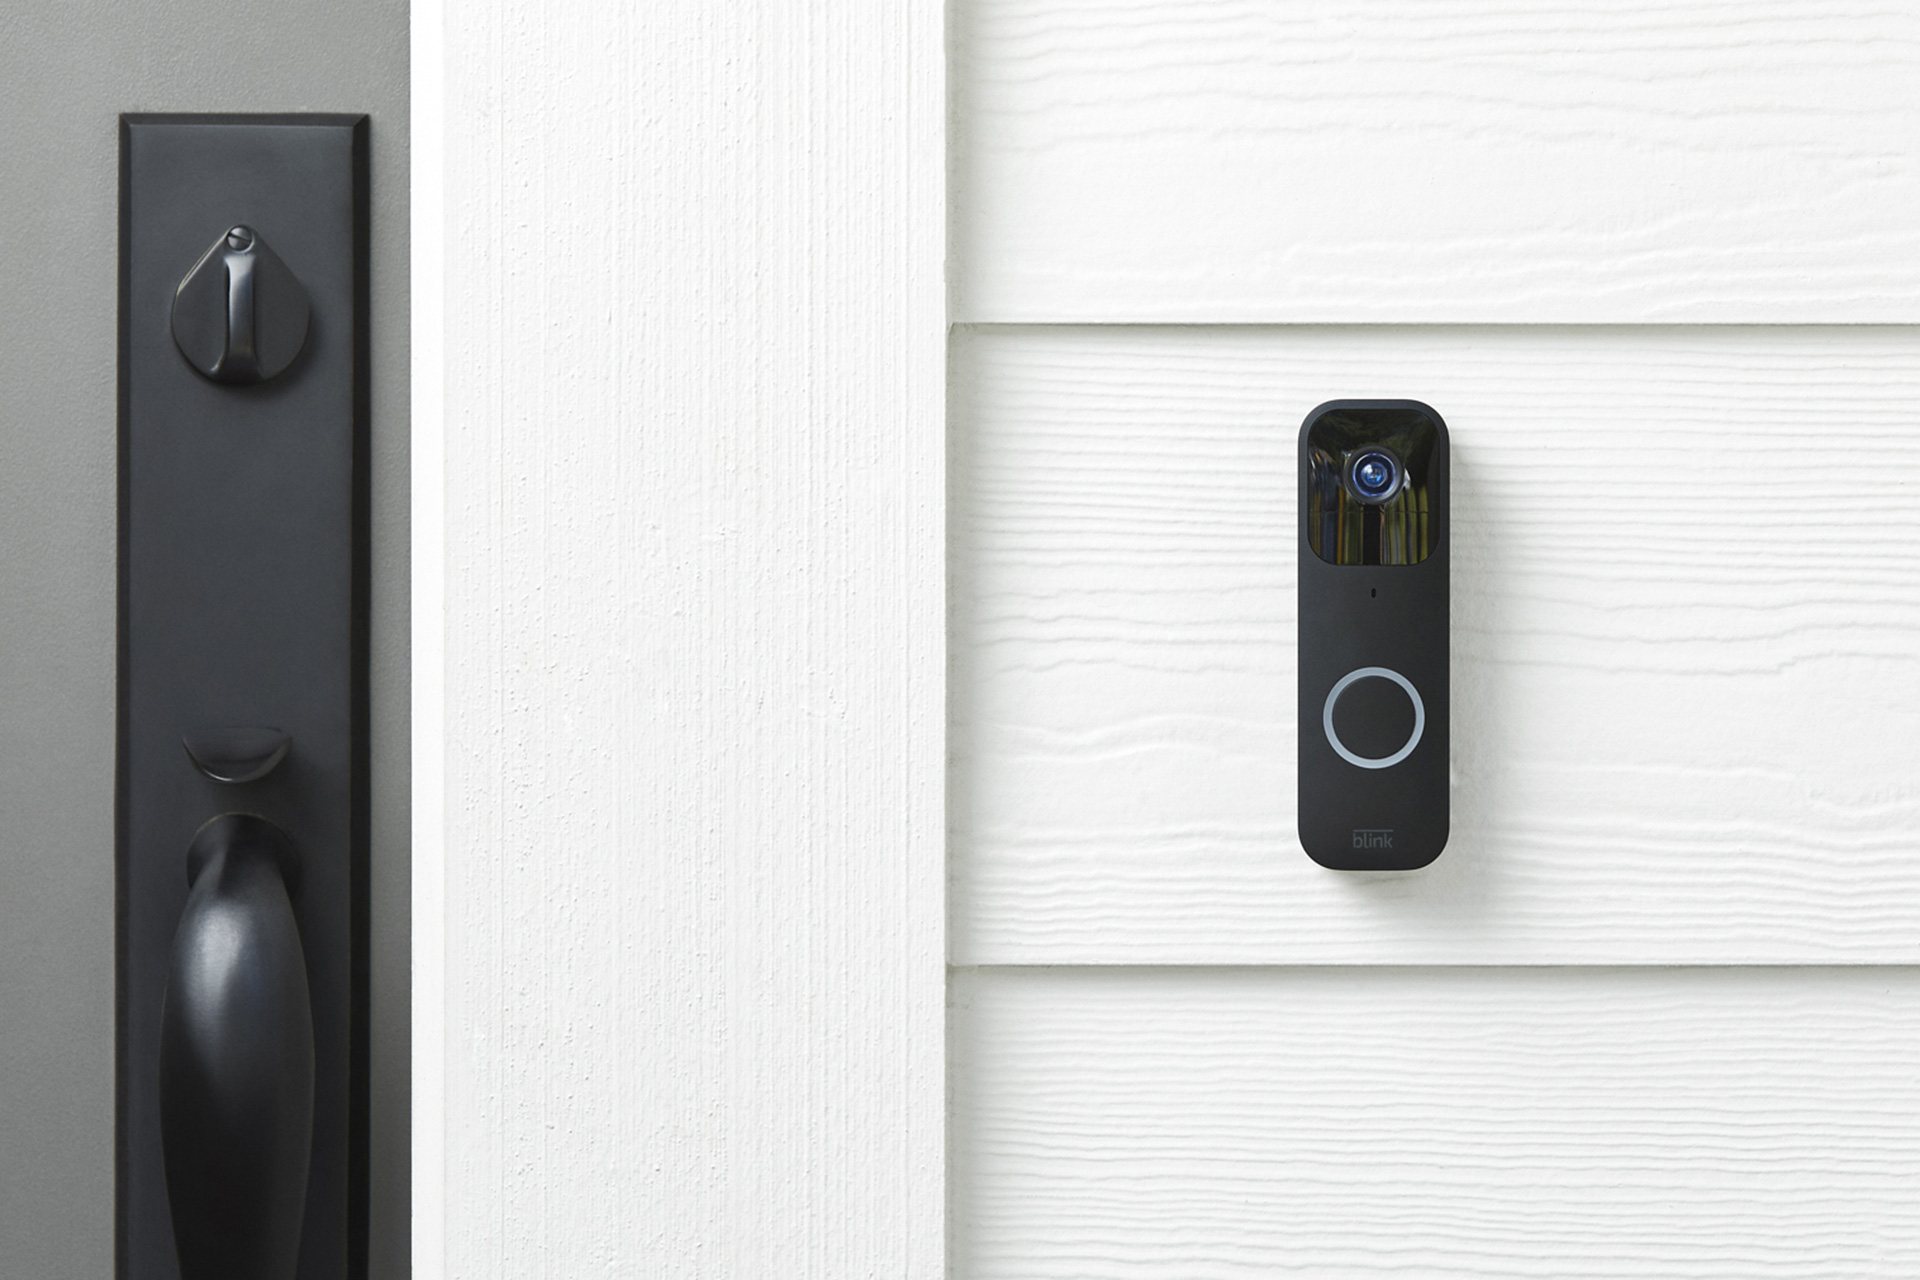 Blink Security Cameras and Video Doorbells are up to 43% off